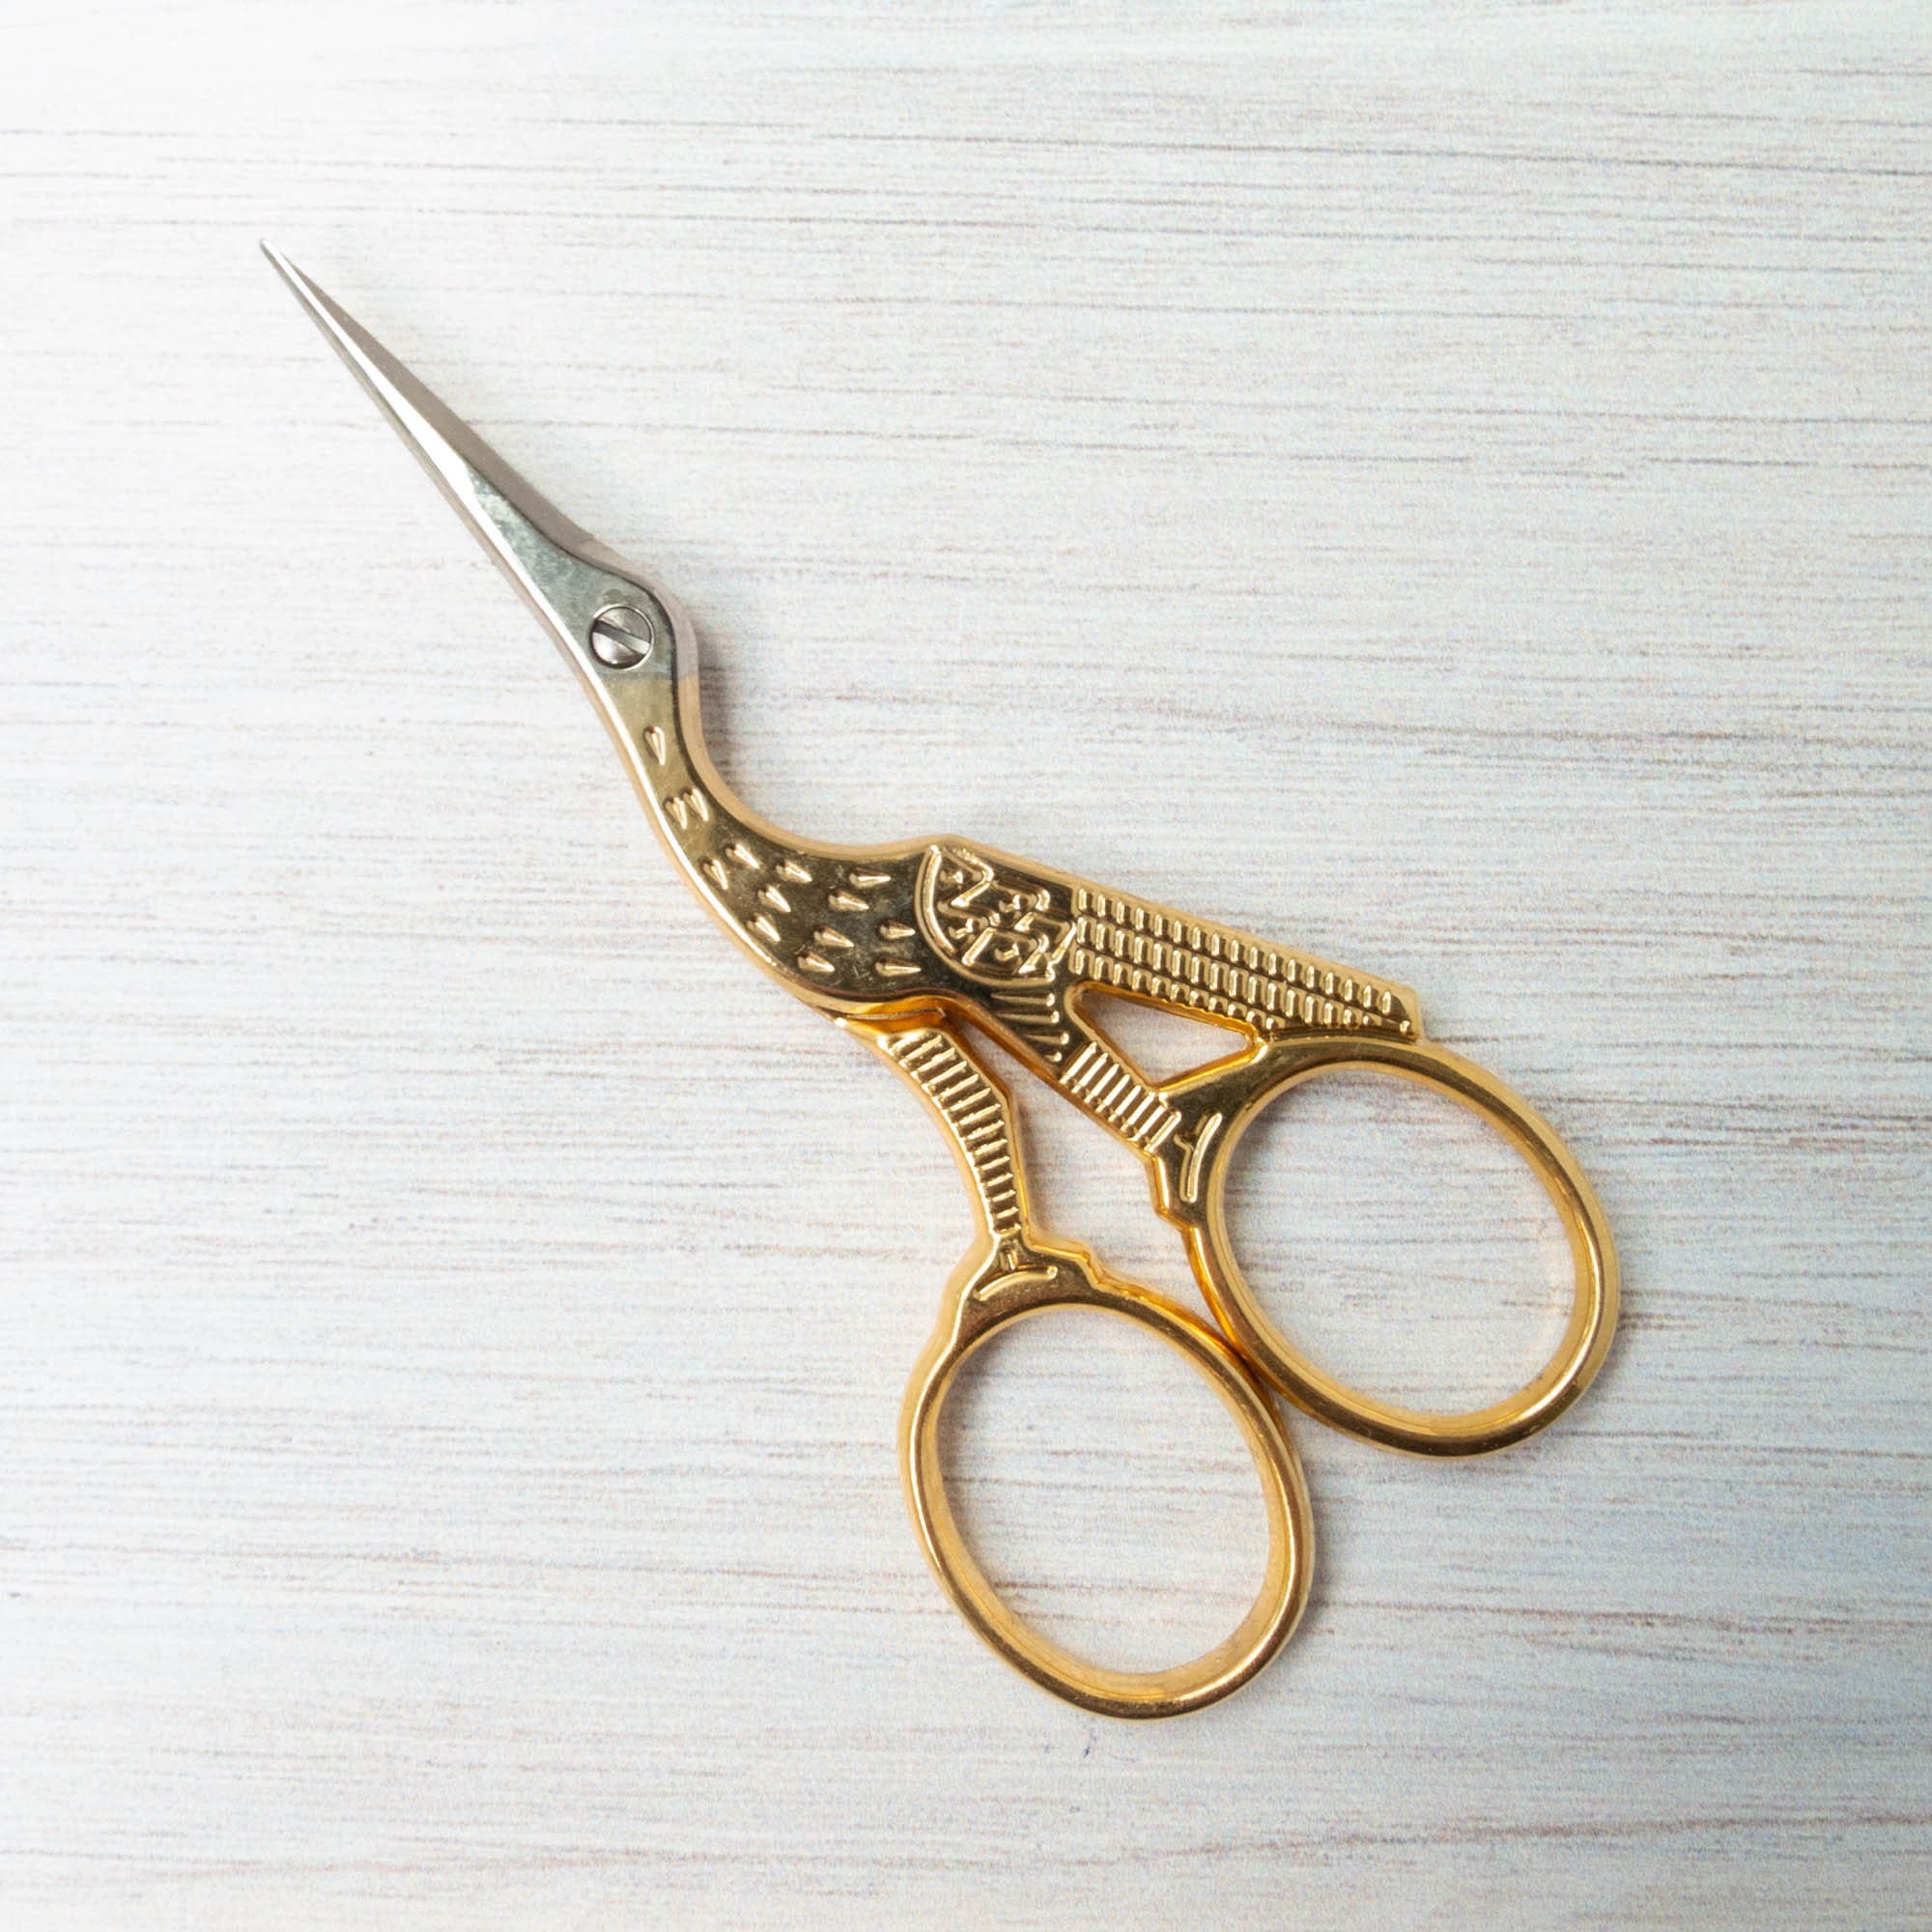 3 1/2 Multi Purpose Fancy Scissors Small Embroidery Gold Plated.